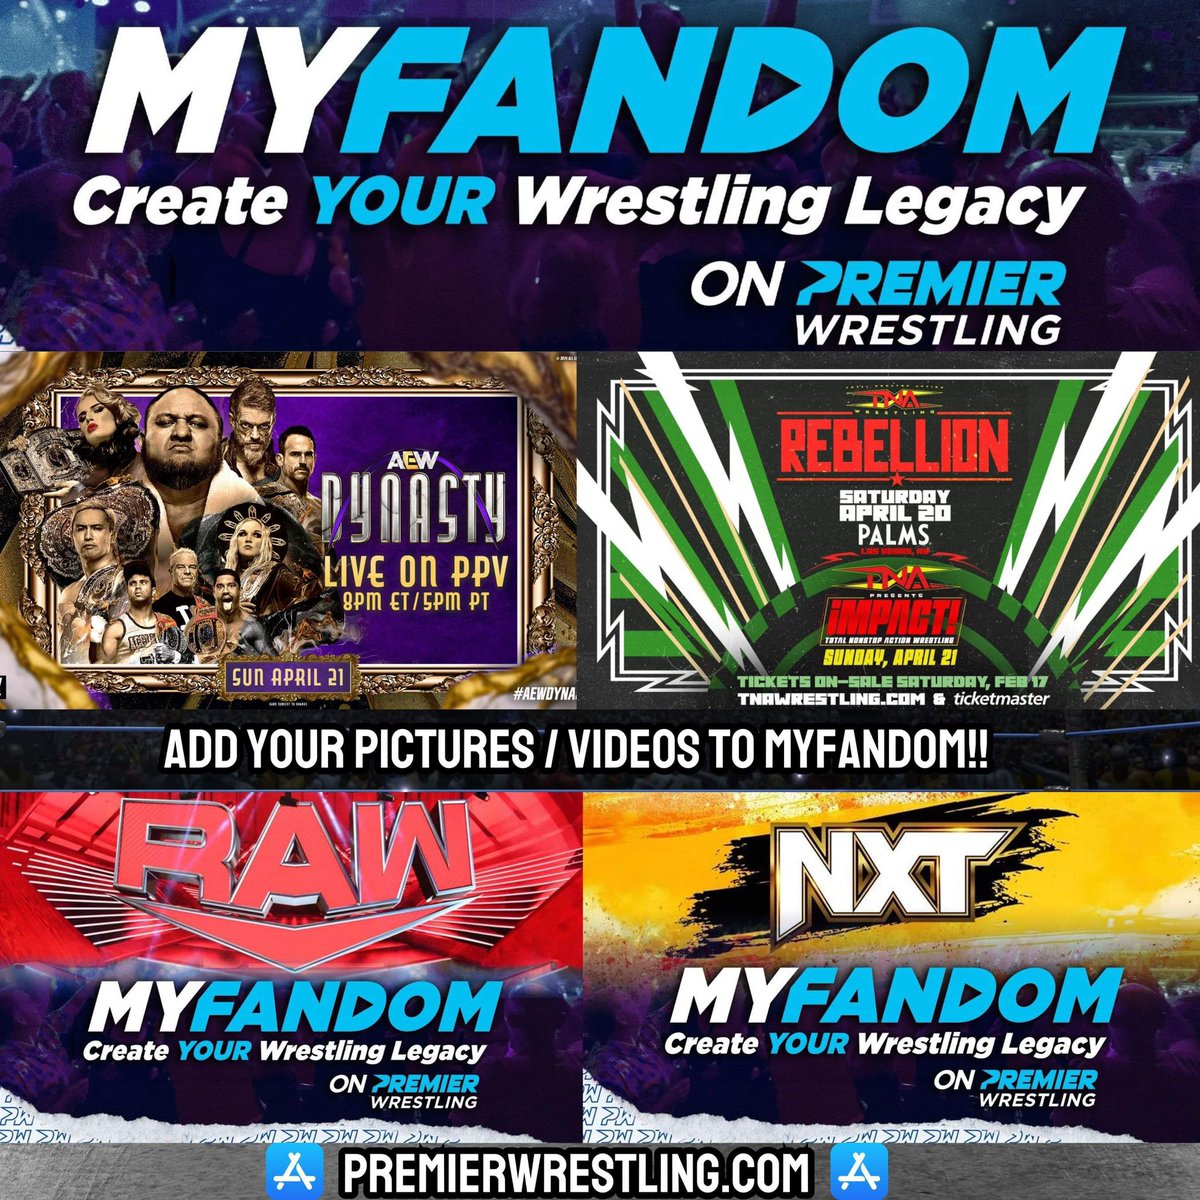 The Last 3 Nights have been HISTORIC in Professional Wrestling across the board and it continues tonight! TNA Rebellion was incredible! AEW Dynasty made history, WWE Raw crowned a NEW Women's champion and tonight coming off the UFC News, NXT Goes LIVE! Did you attend any of these